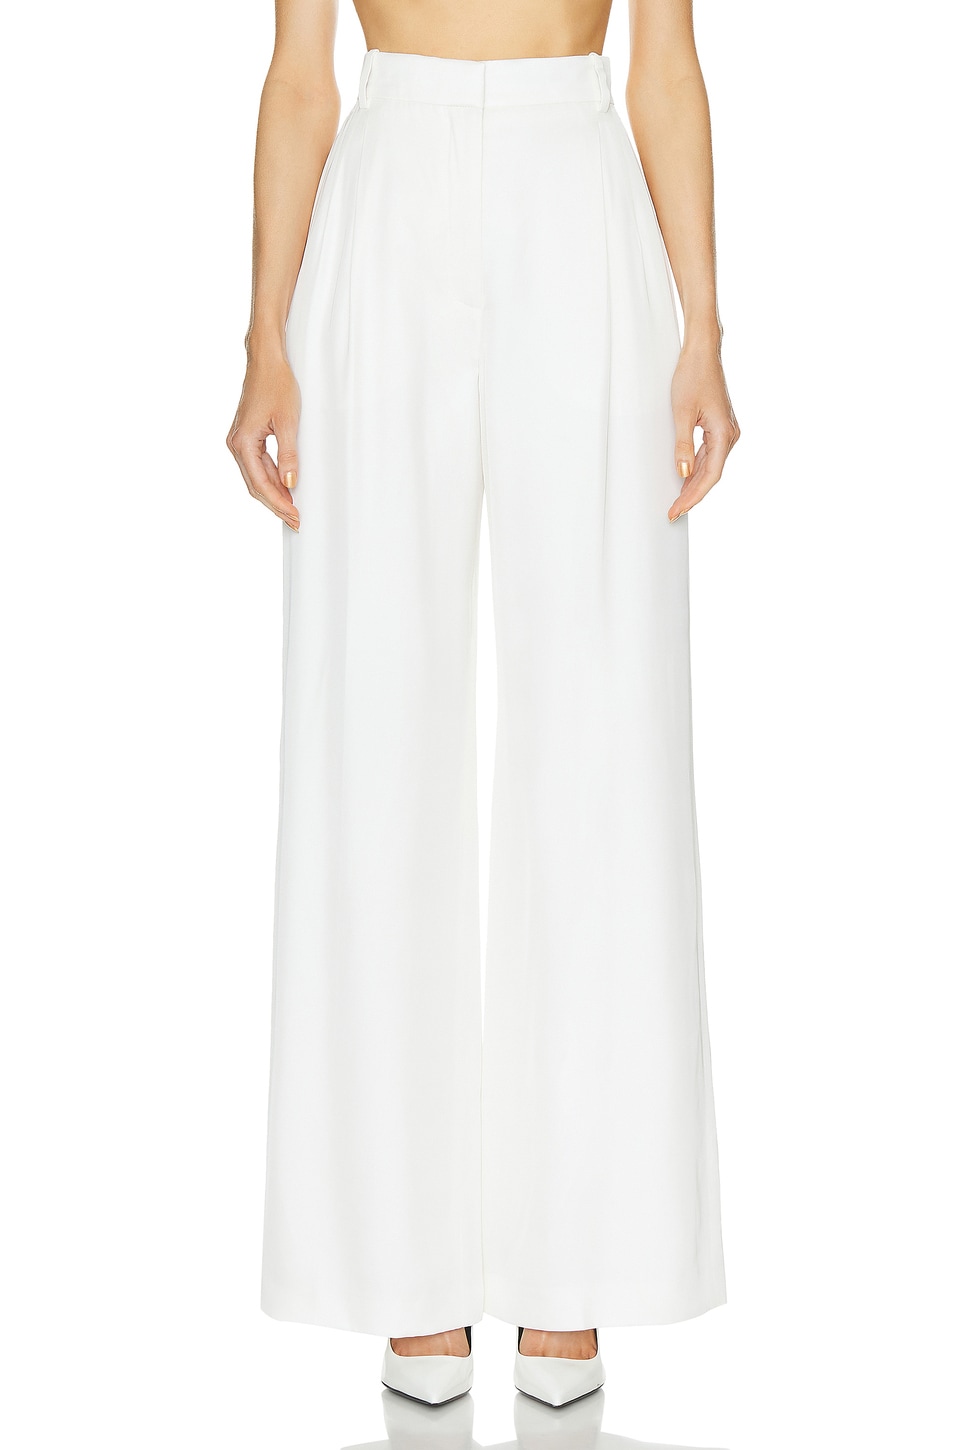 Image 1 of Alexander McQueen Twill Trouser in Ivory